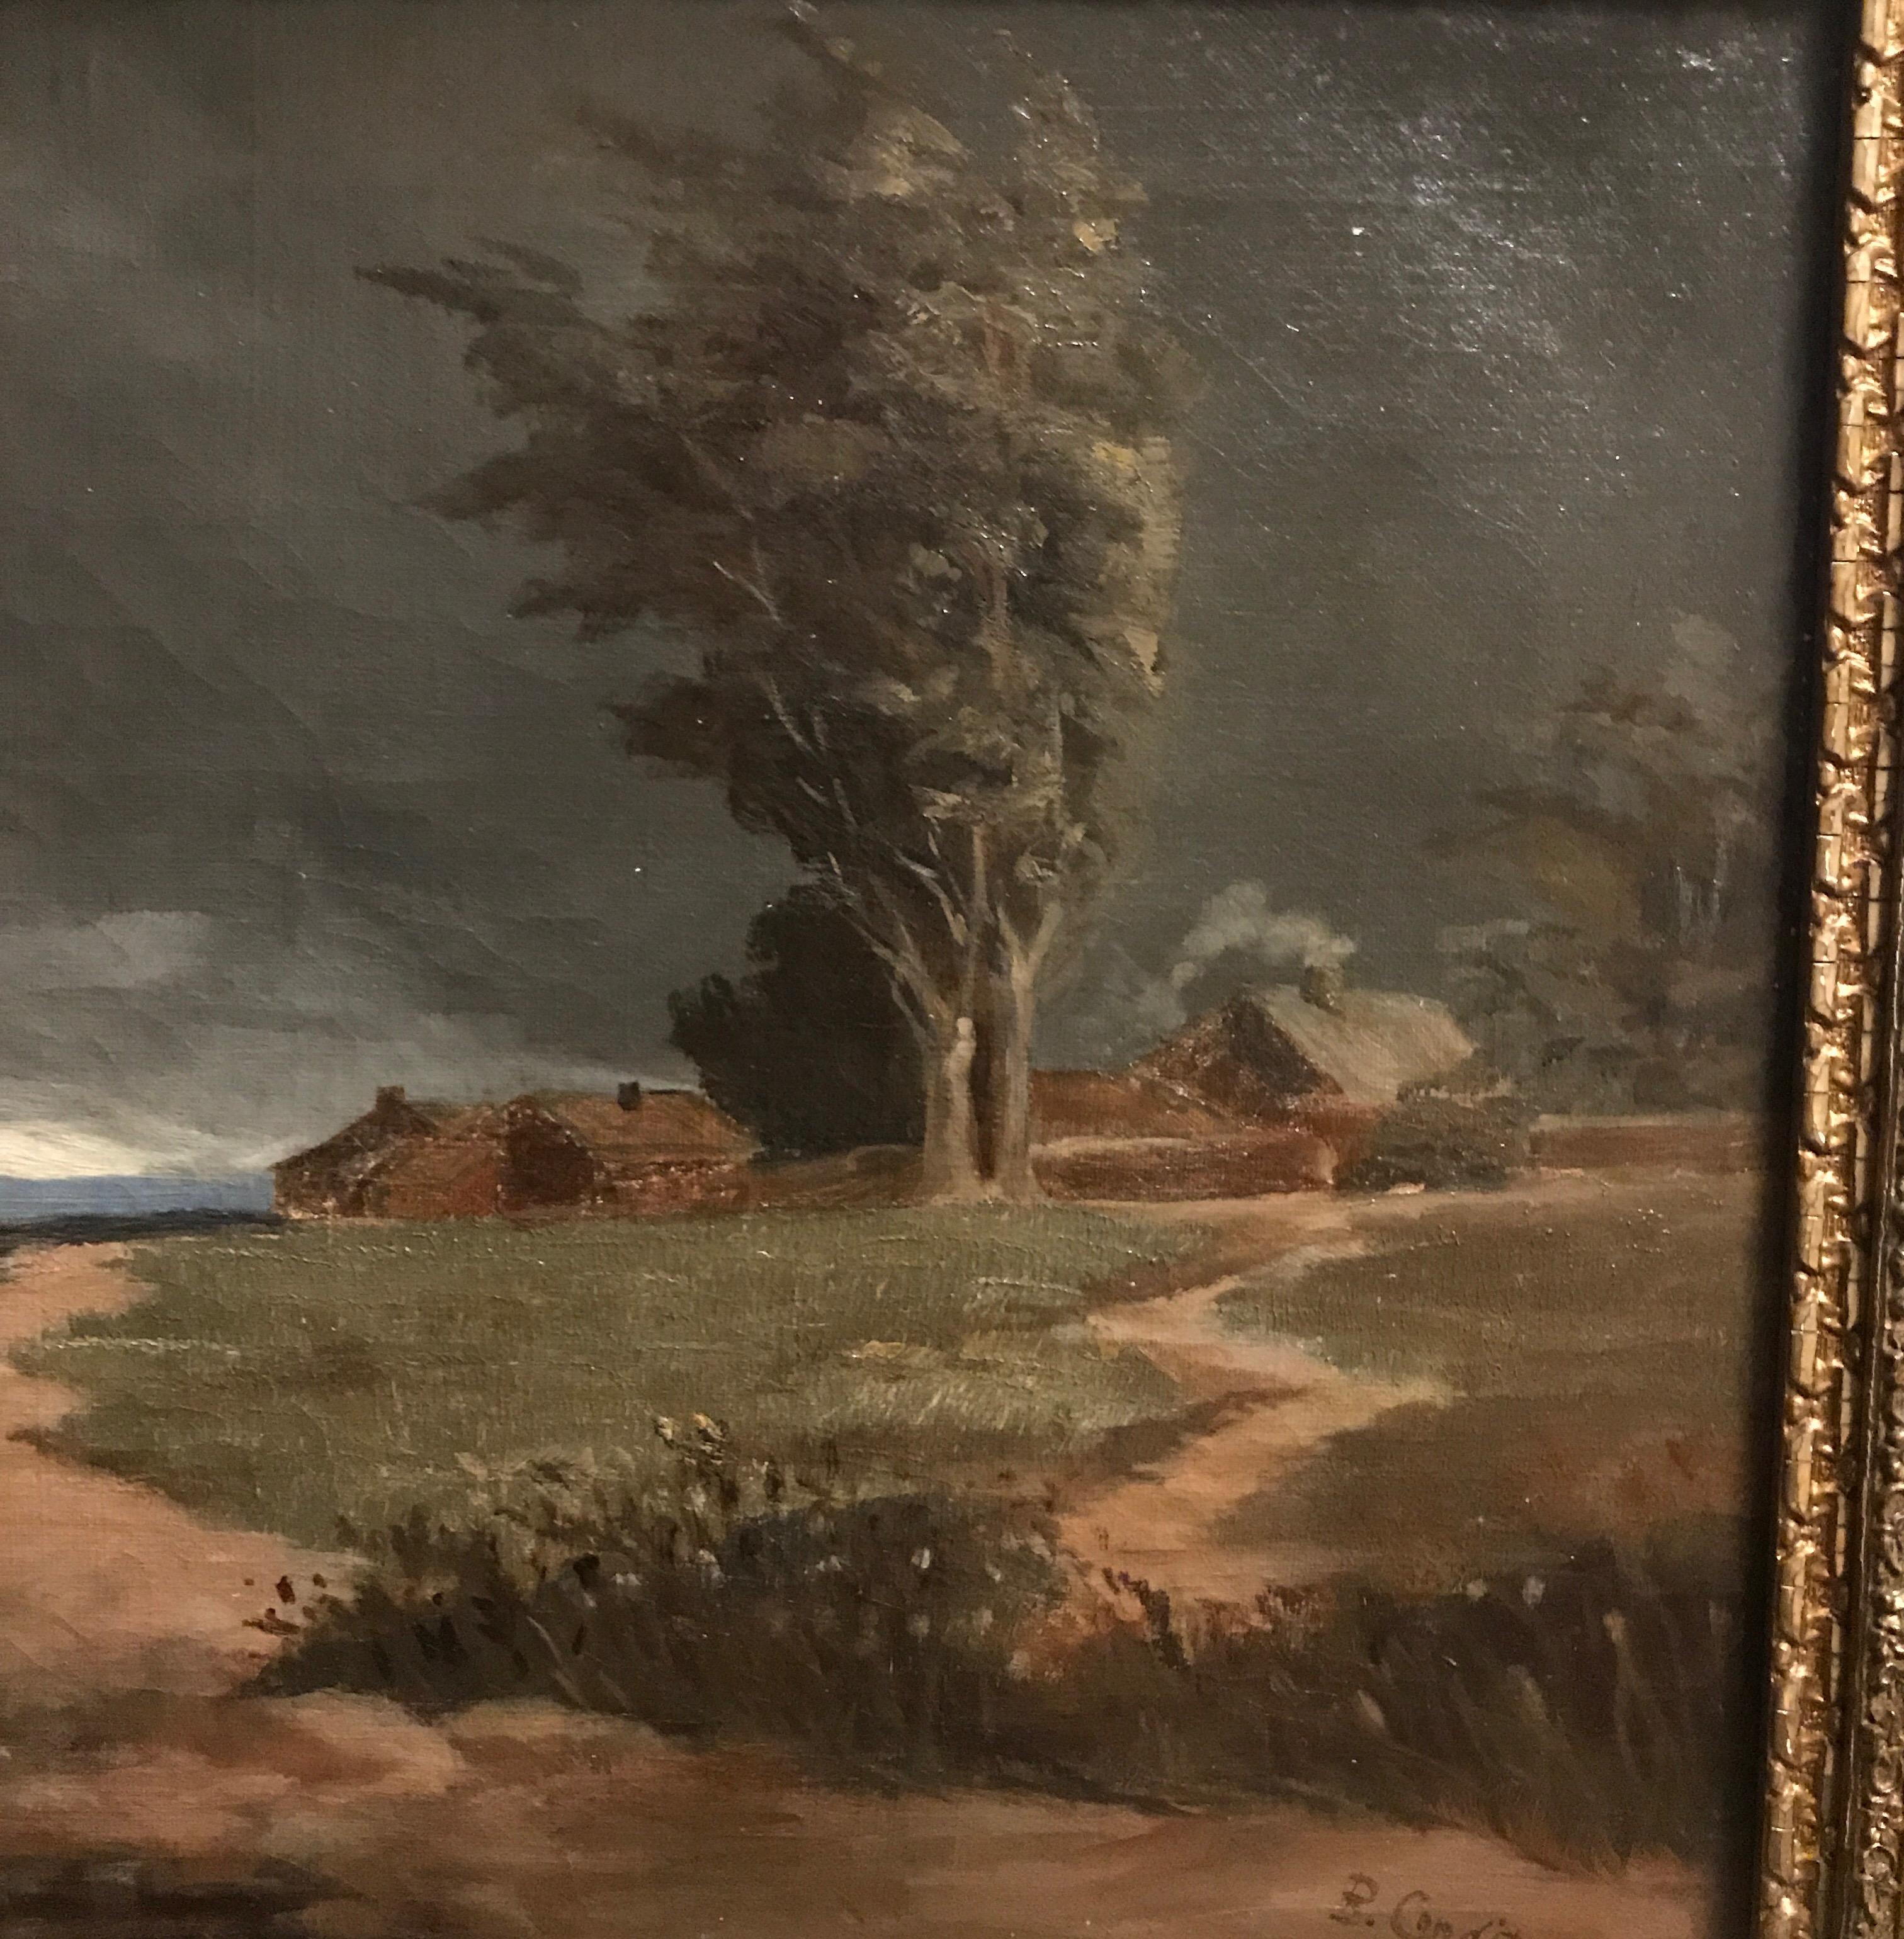 Painted 19th Century Oil Painting ”Approaching Storm” Signed B. Condit Original Frame